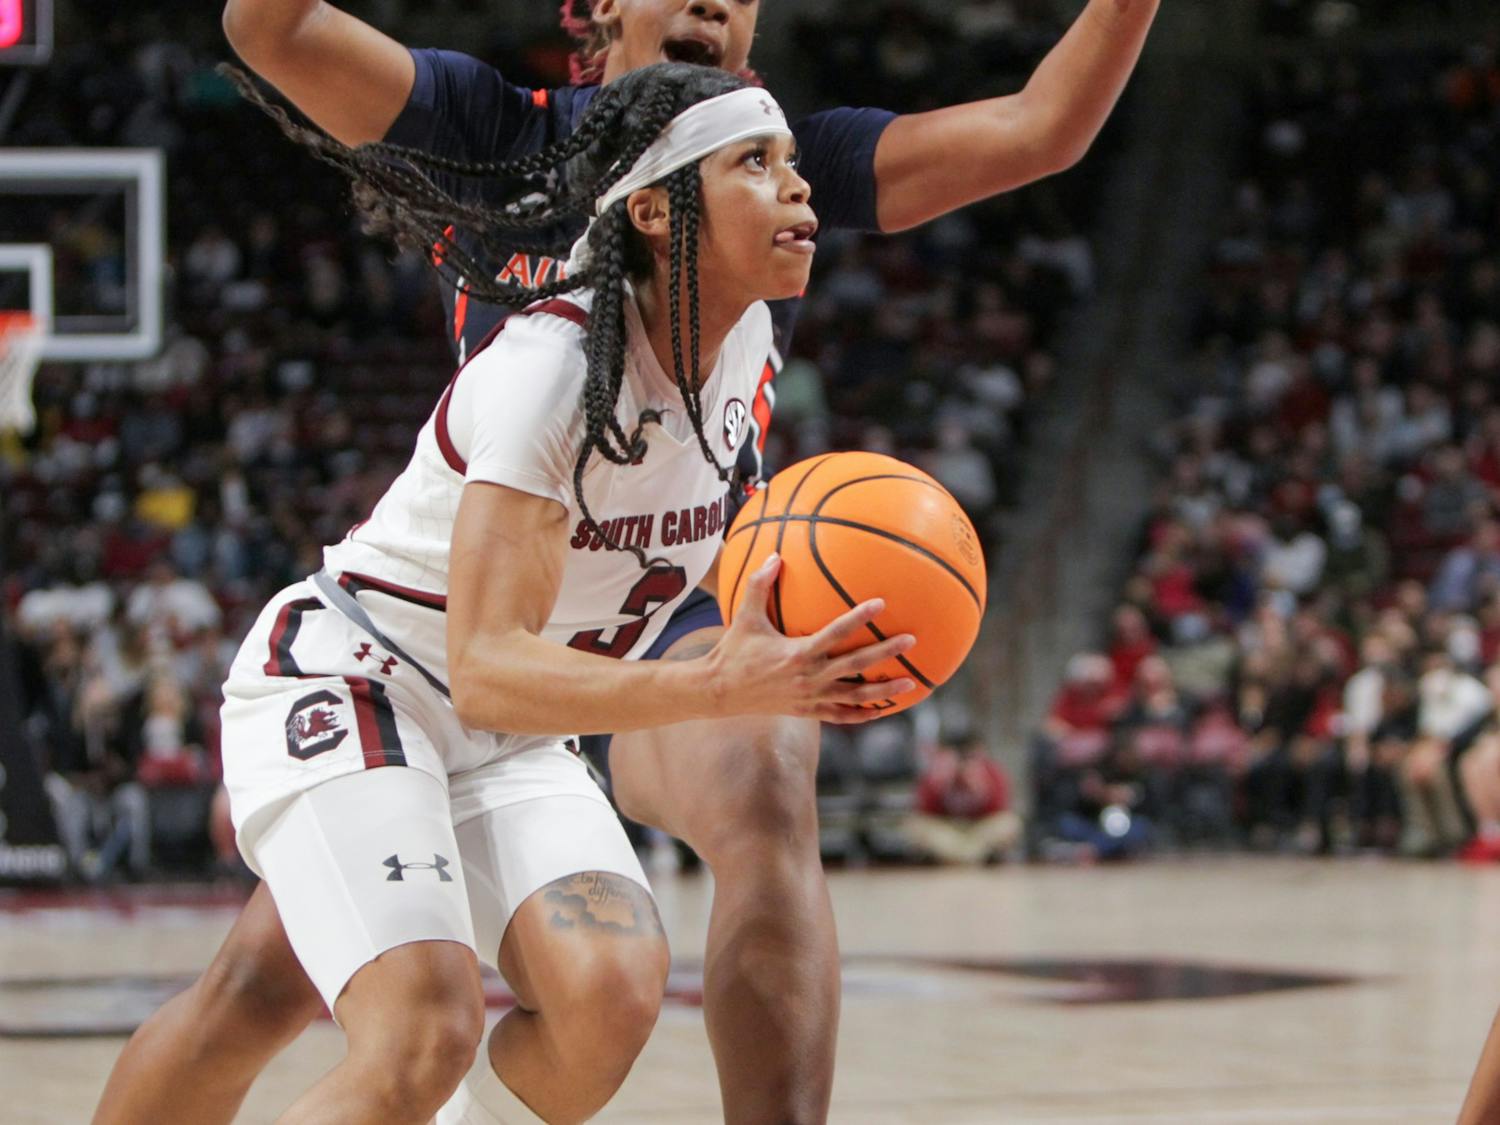 Senior guard Destanni Henderson prepares to shoot during a game on Feb. 17, 2022 at Colonial Life Arena in Columbia, SC. The Gamecocks beat Auburn 75-38.